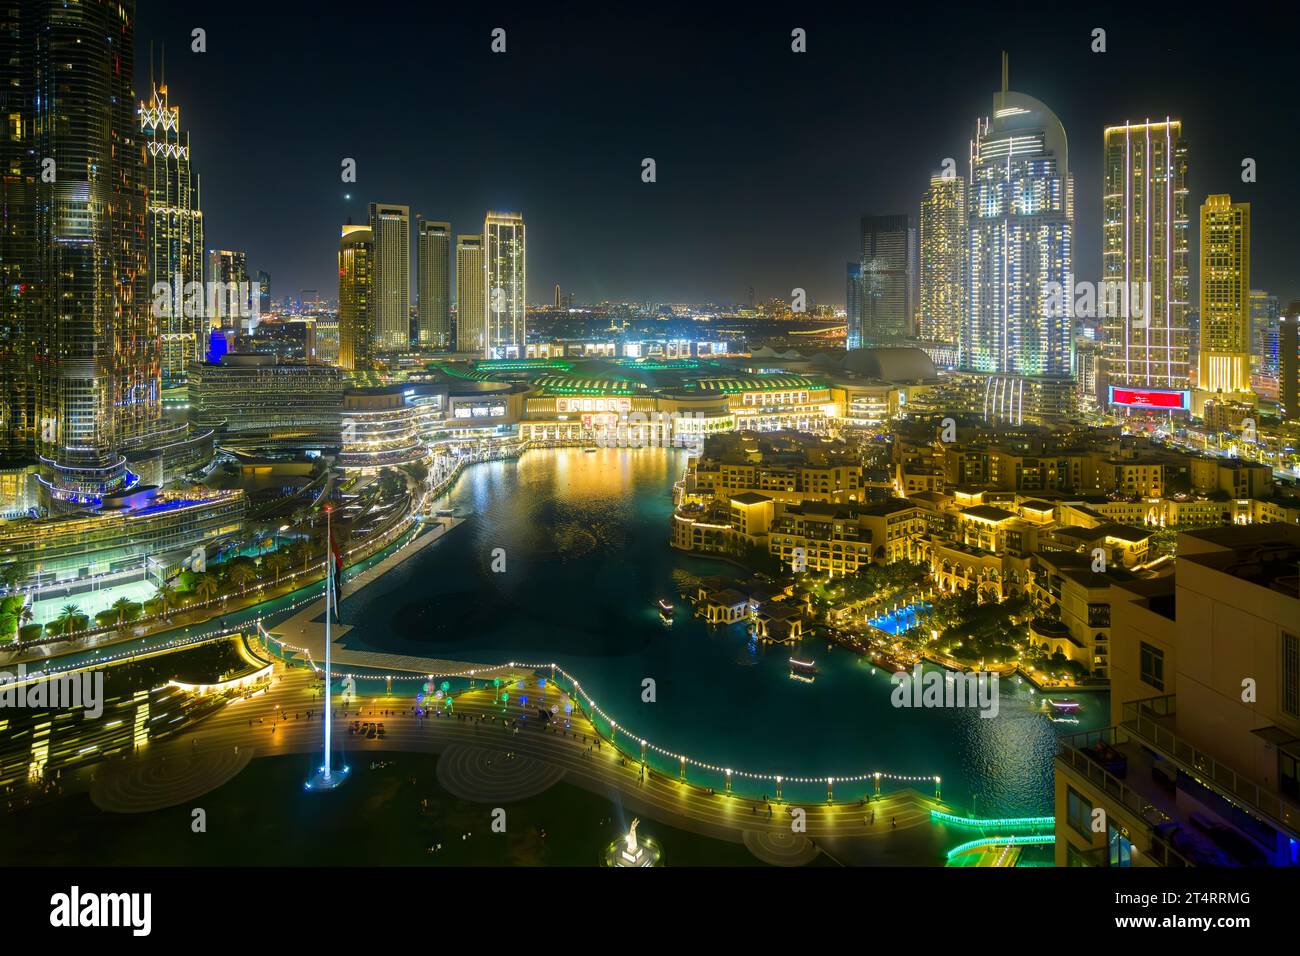 The waters of the Dubai Fountain surrounded by illuminated buildings and the Dubai Shopping Mall at night at Downtown Dubai, United Arab Emirates. Stock Photo